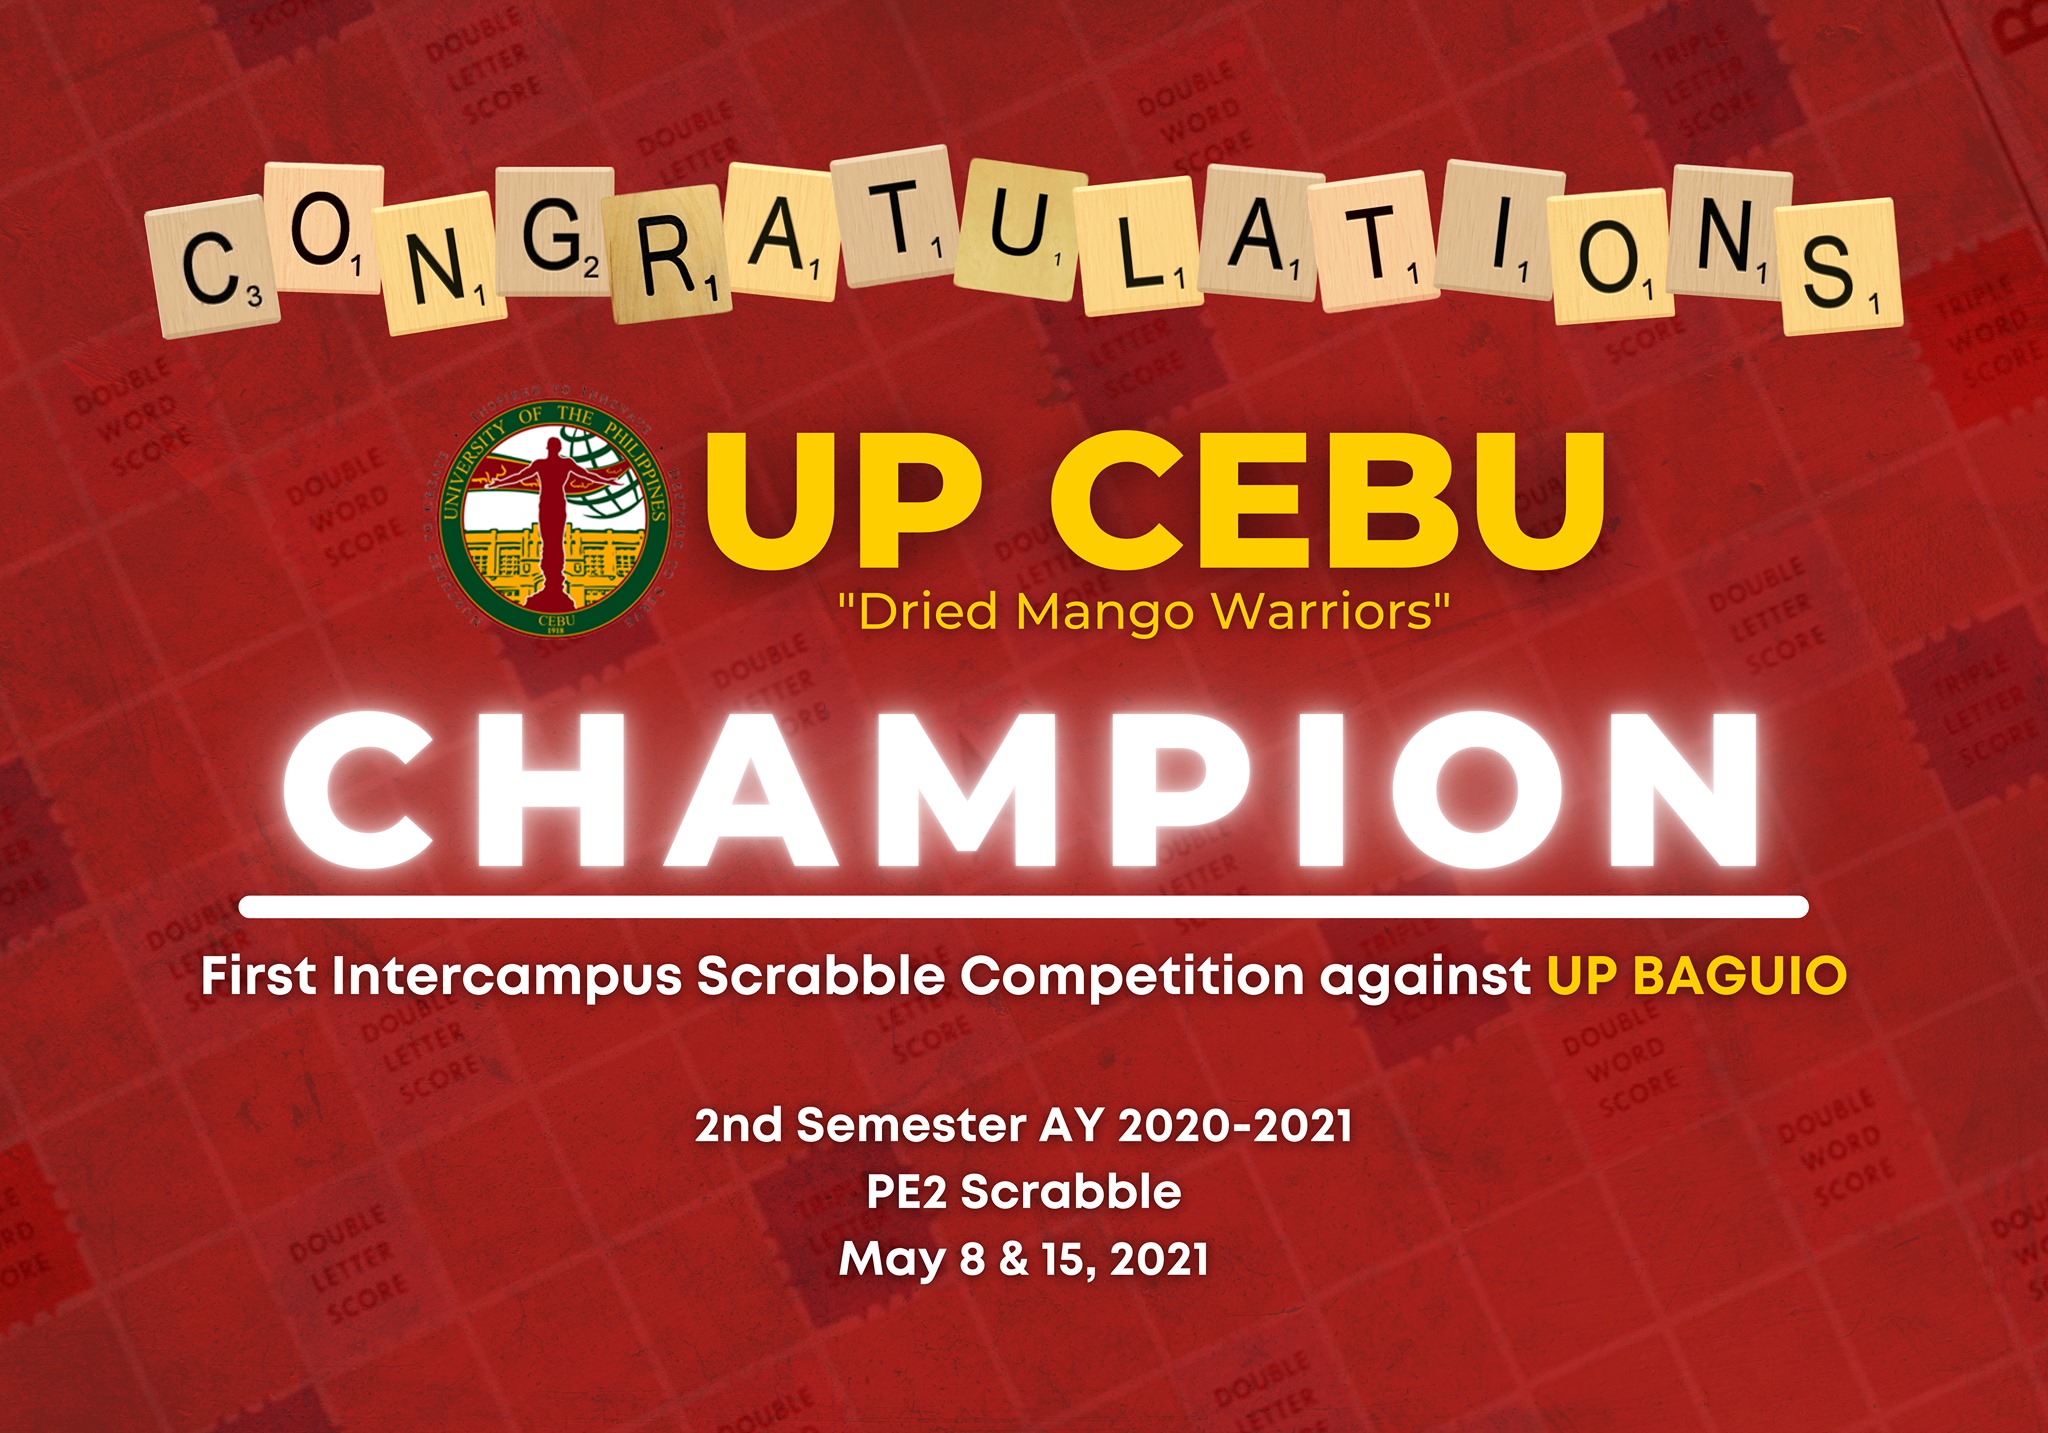 The UP Cebu’s Scrabble Team Wins in the First Intercampus Scrabble Competition against UP Baguio